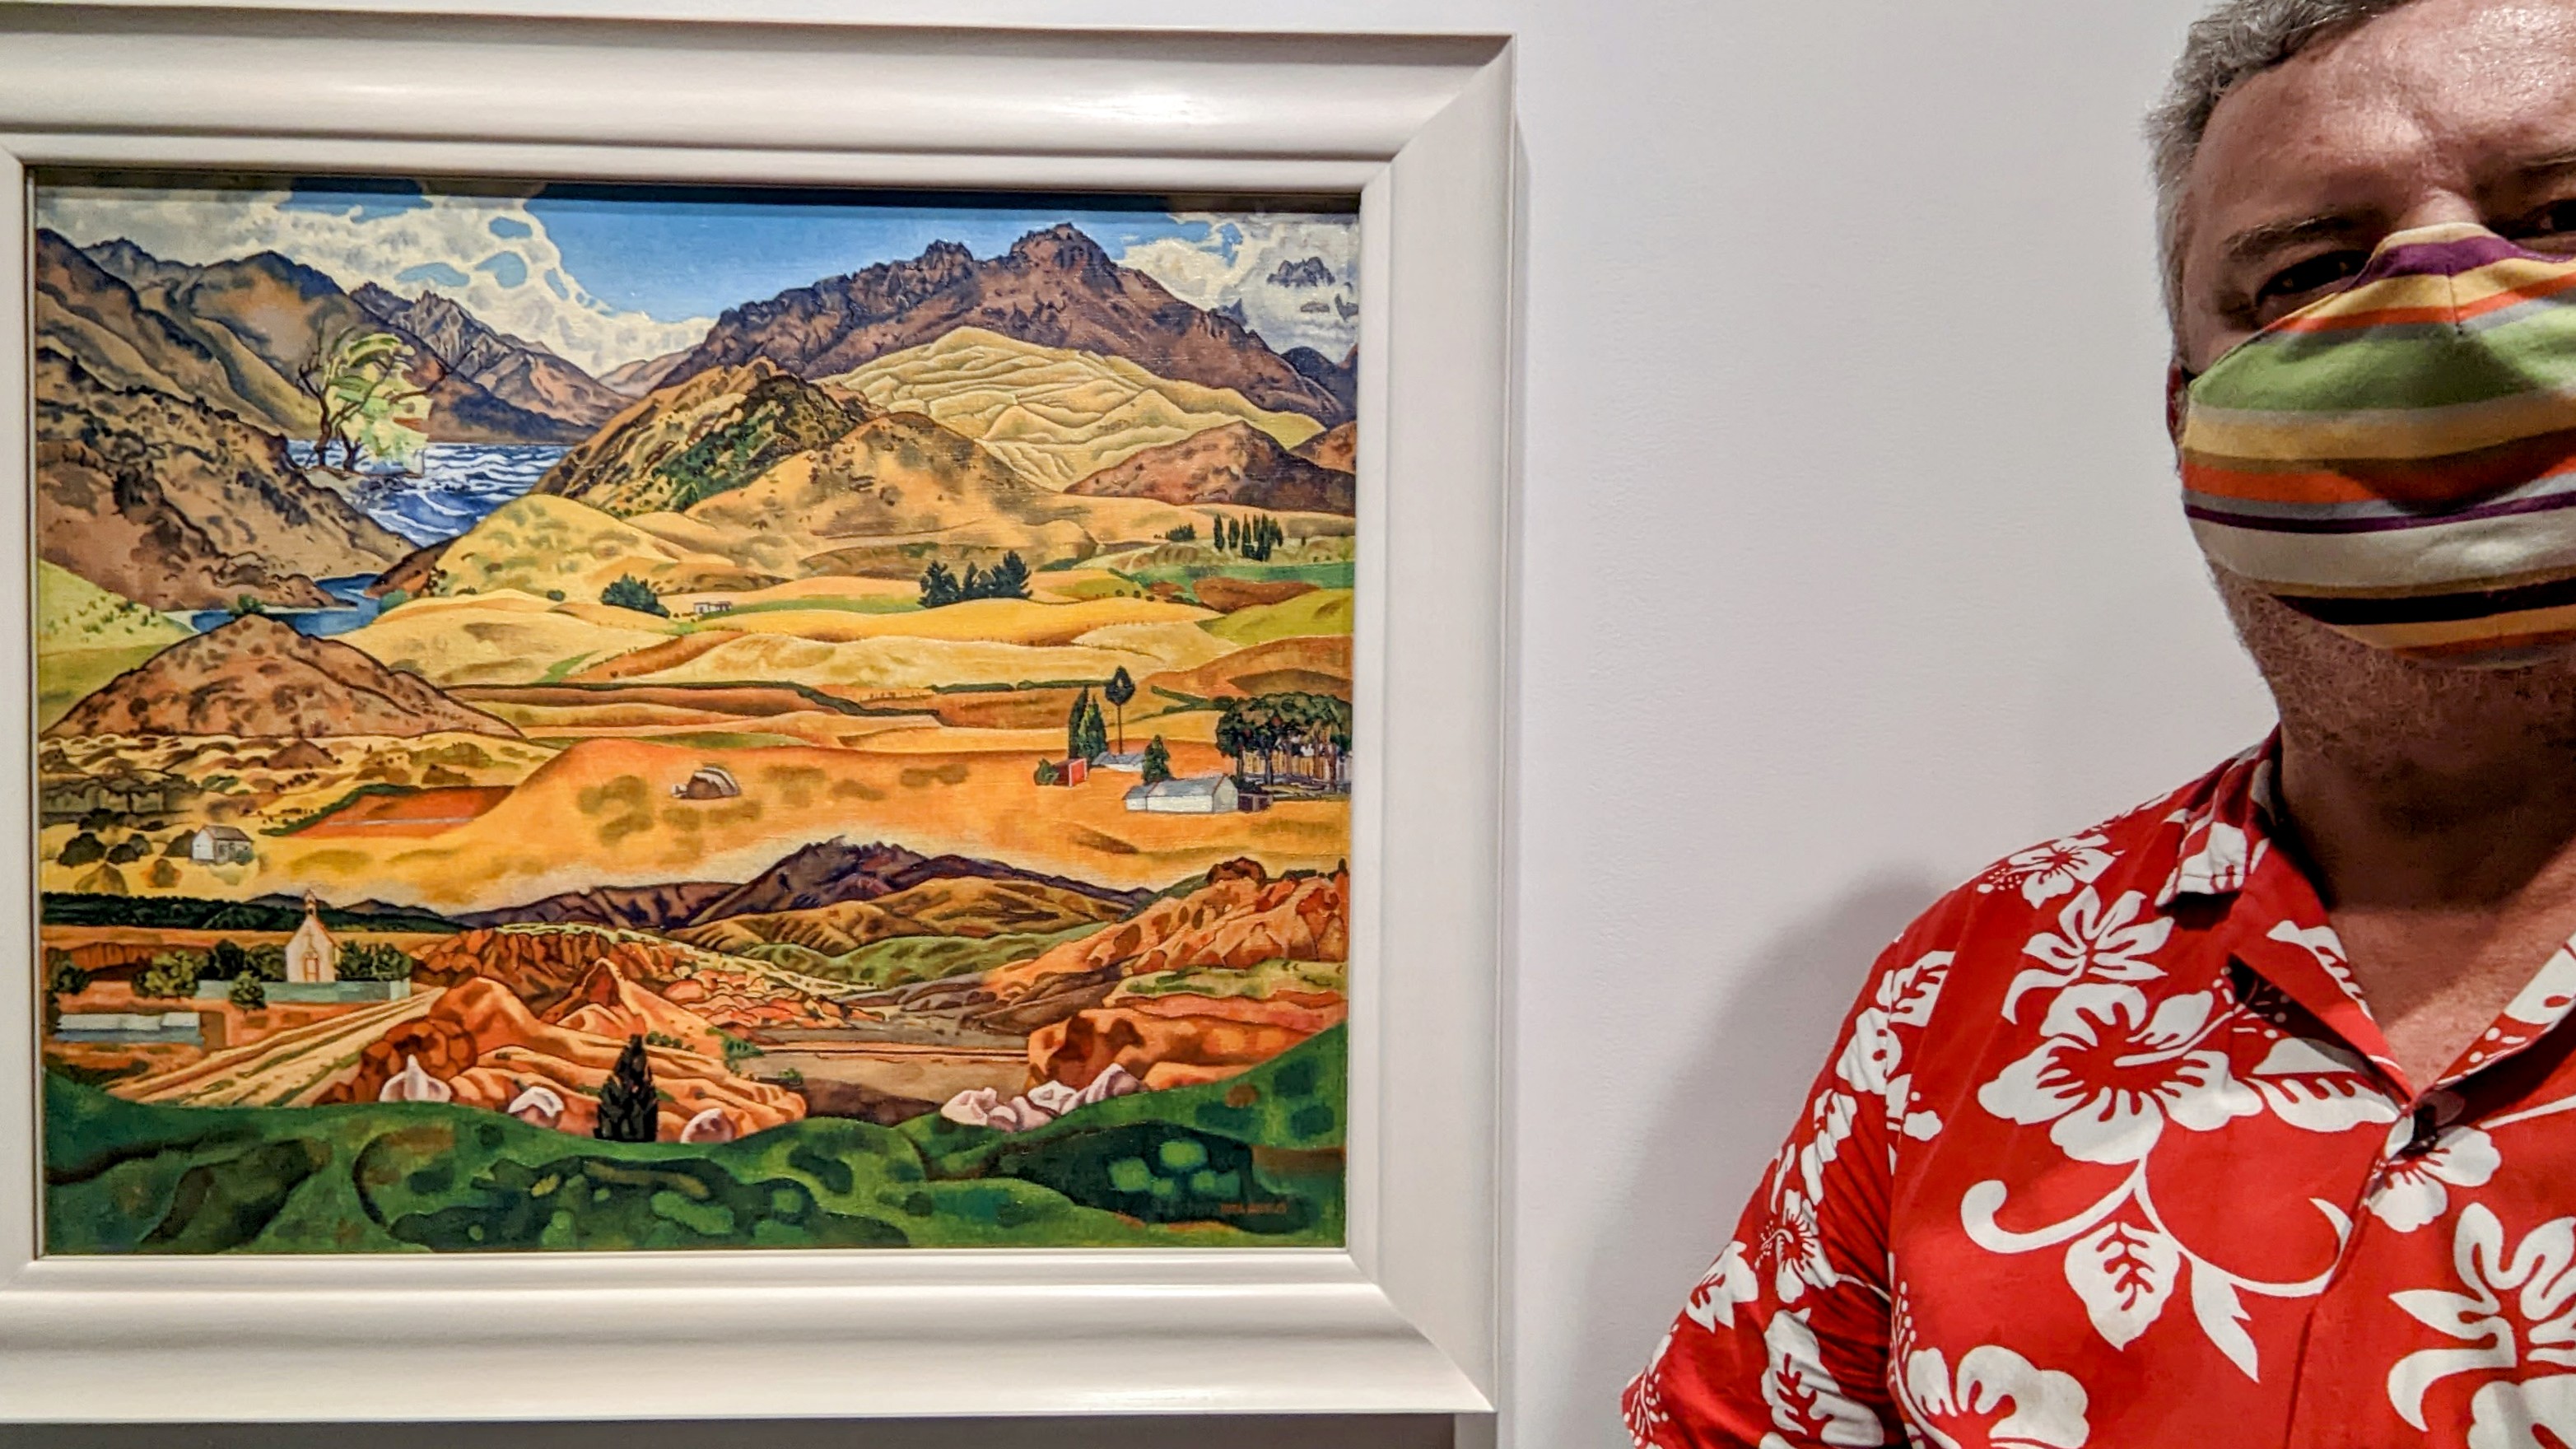 COVID masked Mike Riversdale stood near the Rita Angus painting 'Central Otago'